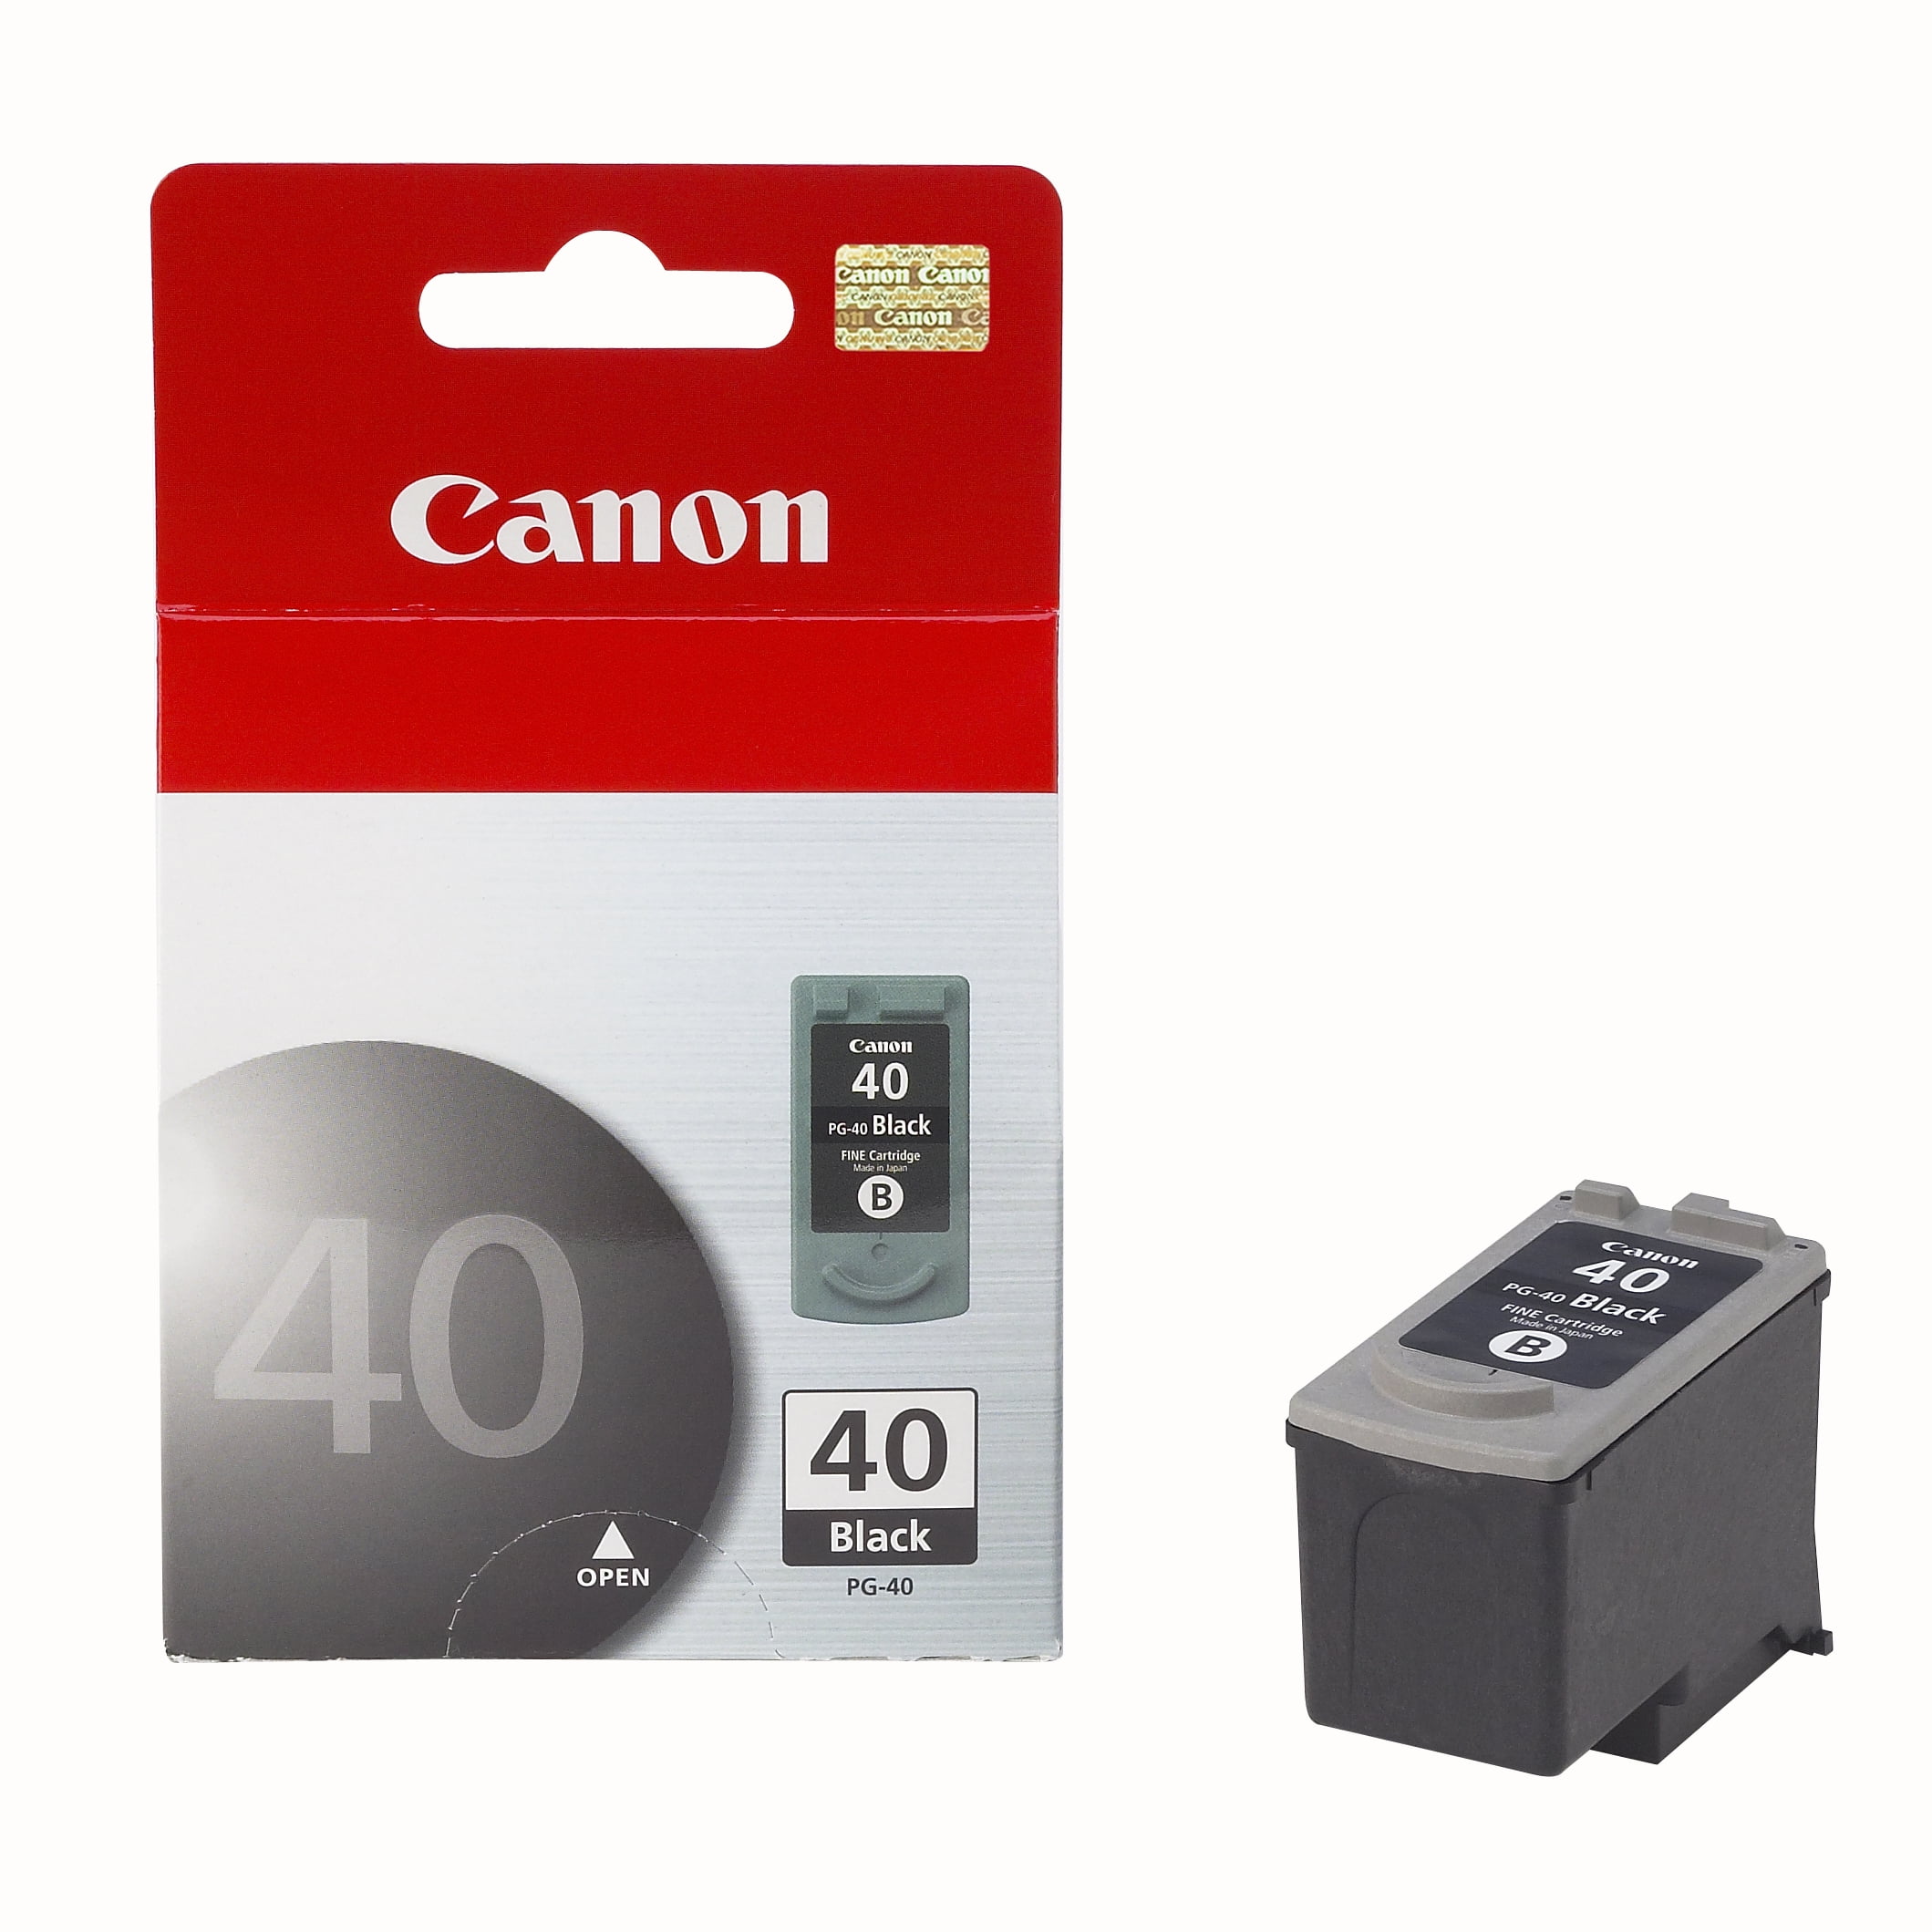 2 Pack Economink Remanufactured Ink Cartridge Replacement for Canon PG-40 CL-41 PG40 CL41 Black Color use for MP470 Ip2600 MP170 MP210 iP2680 iP1800 MX310 MP160 iP1600 MP151 MX300 Printer 